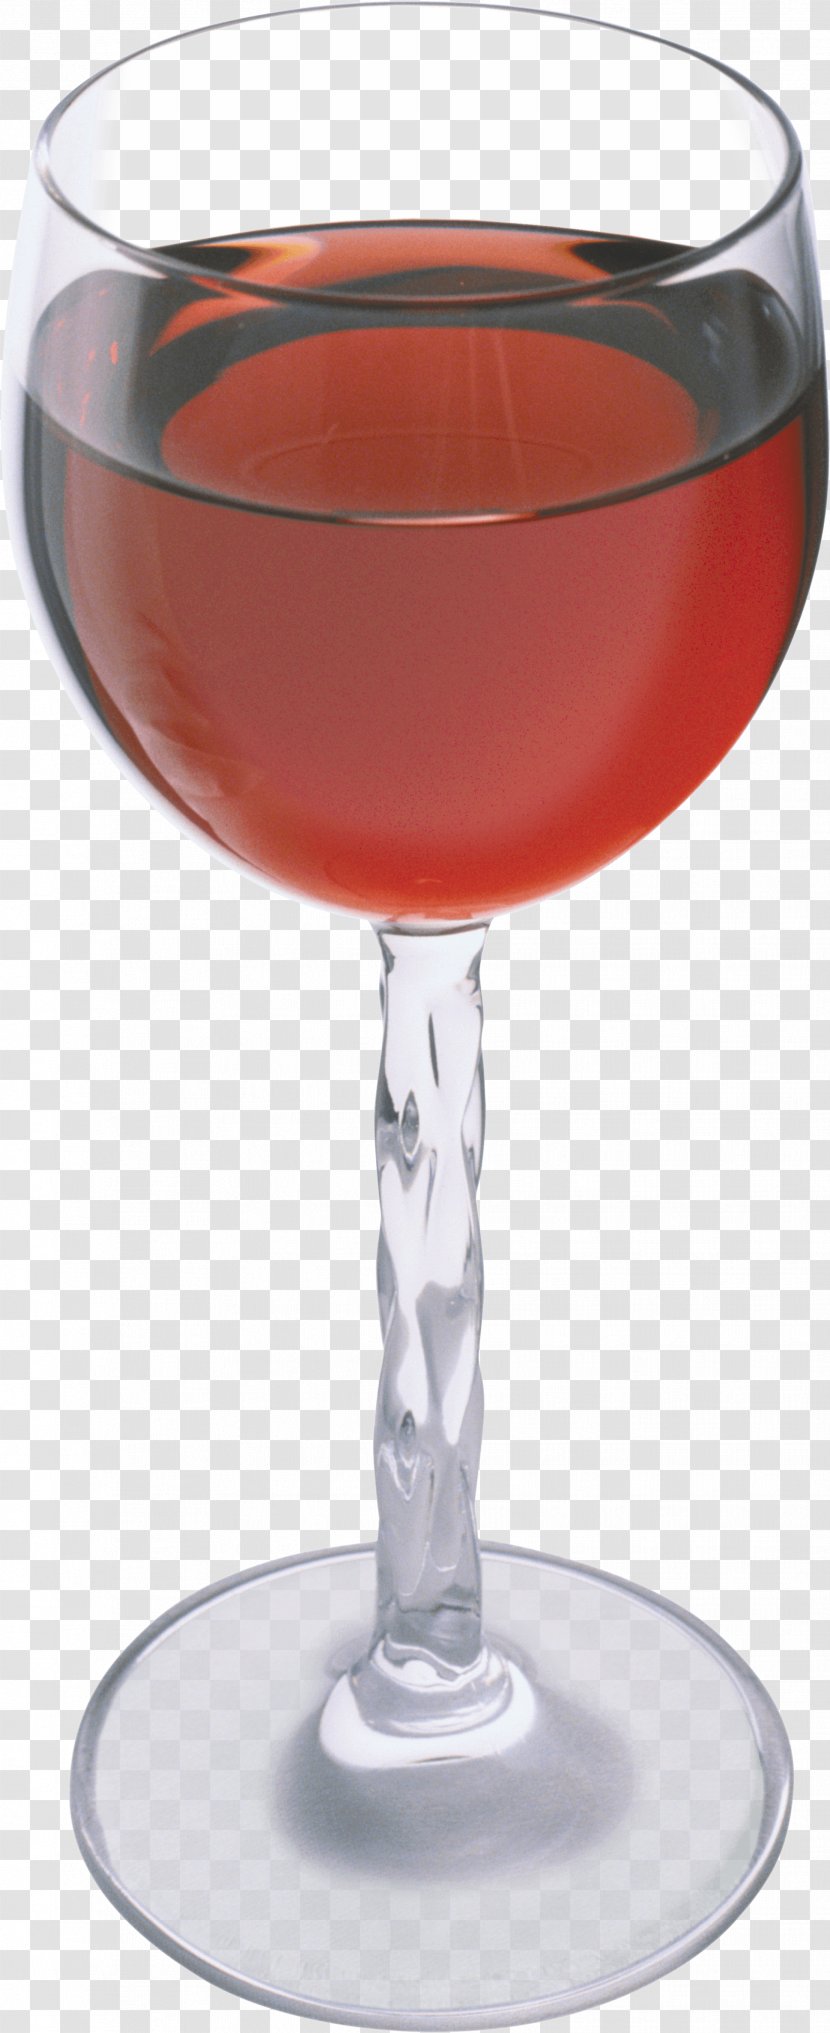 Red Wine Glass Champagne Cocktail Garnish - Image Transparent PNG